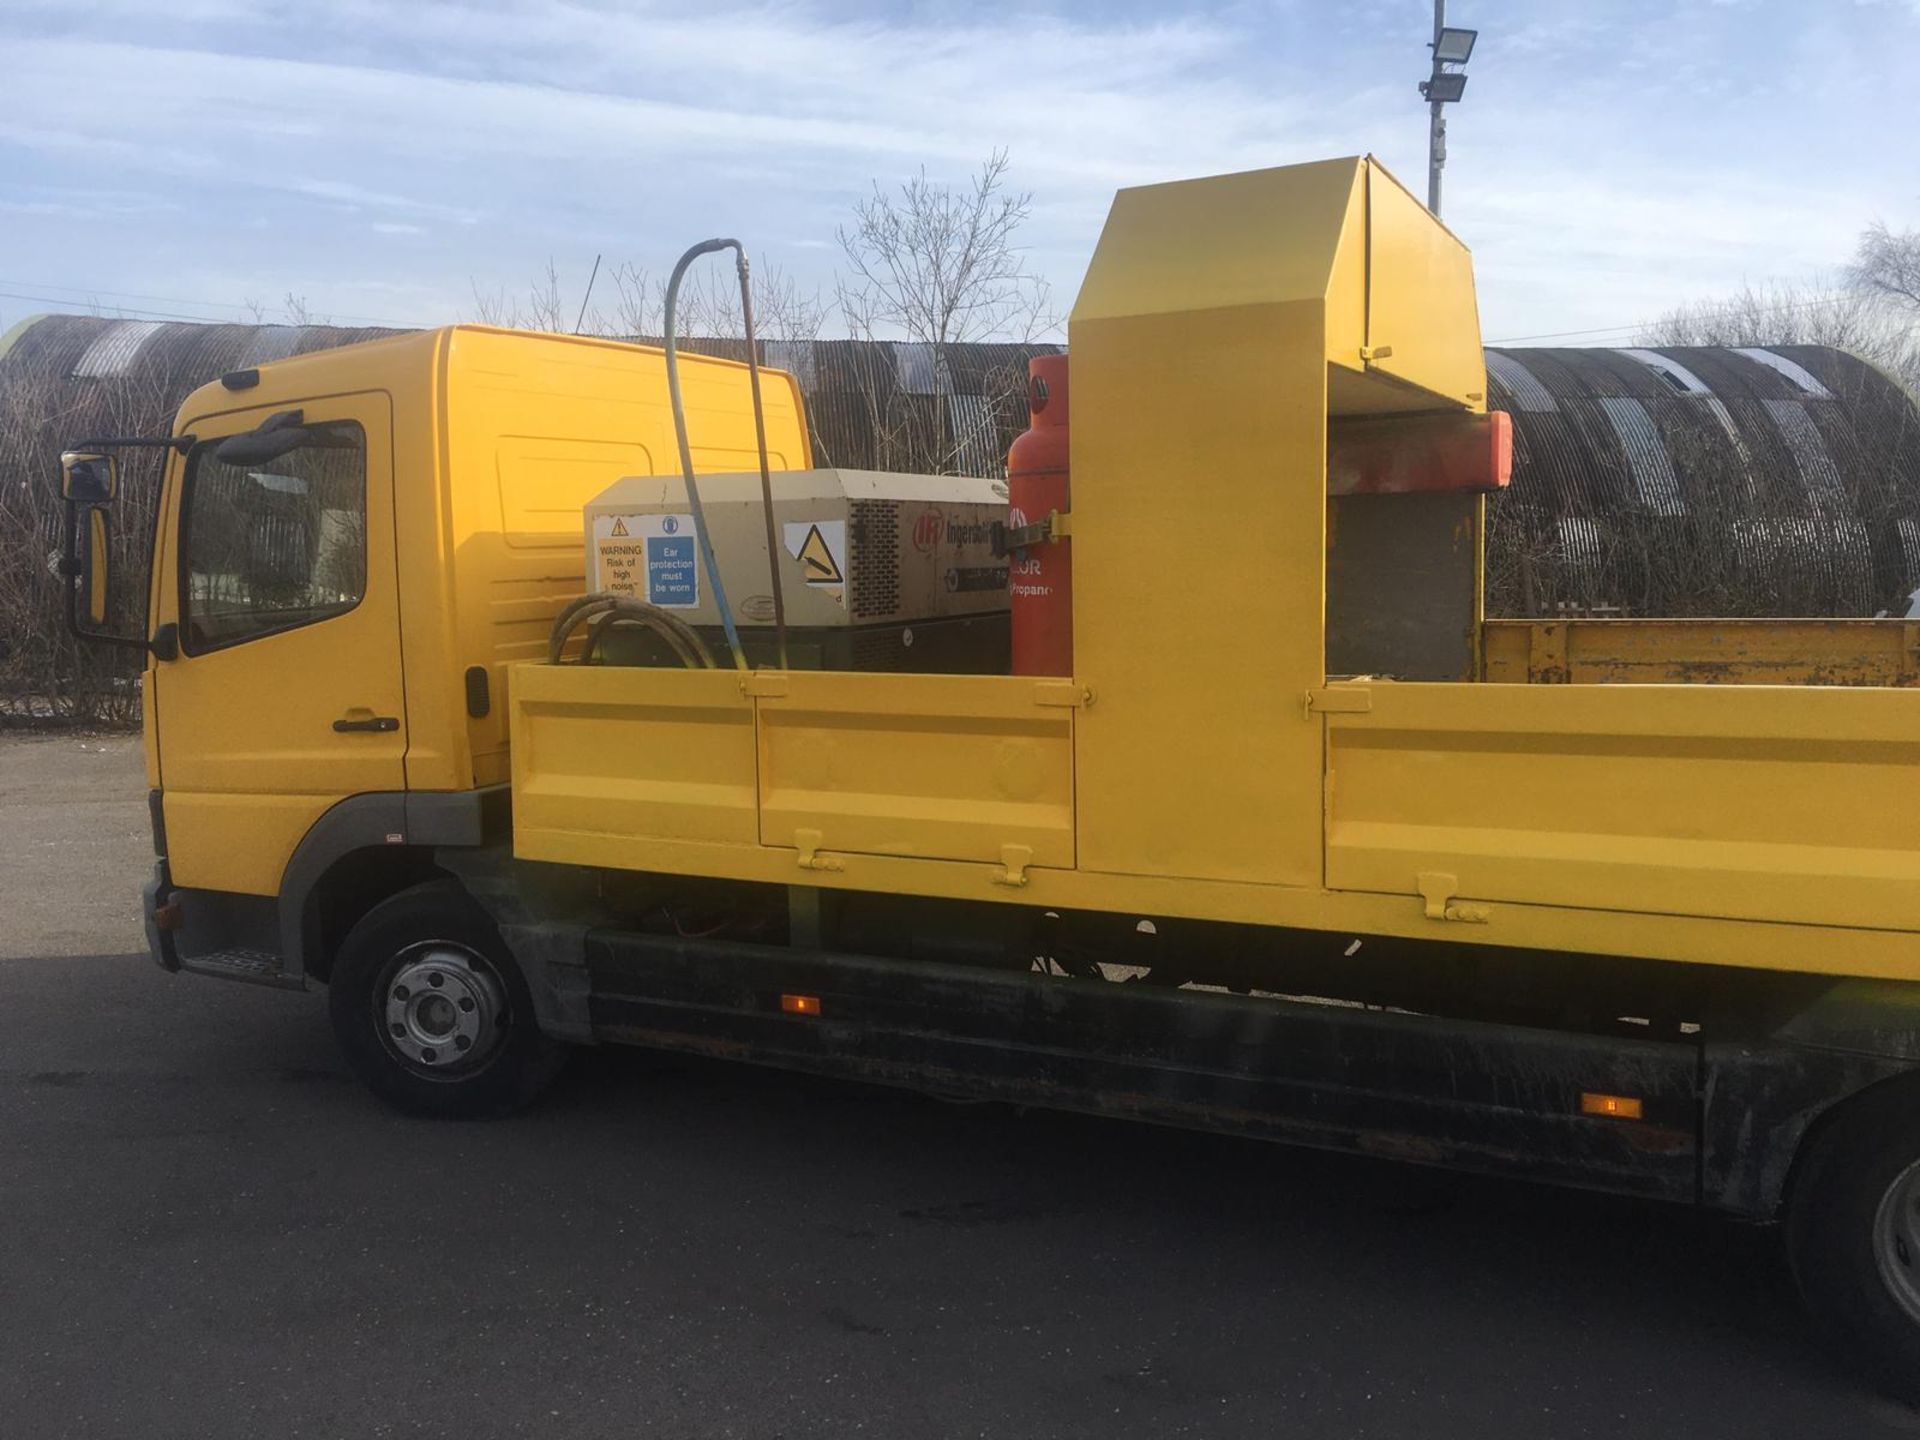 2004/54 REG MERCEDES ATEGO 1018 DAY YELLOW DROPSIDE LINE PAINTING LORRY 4.3L DIESEL ENGINE *NO VAT* - Image 6 of 64